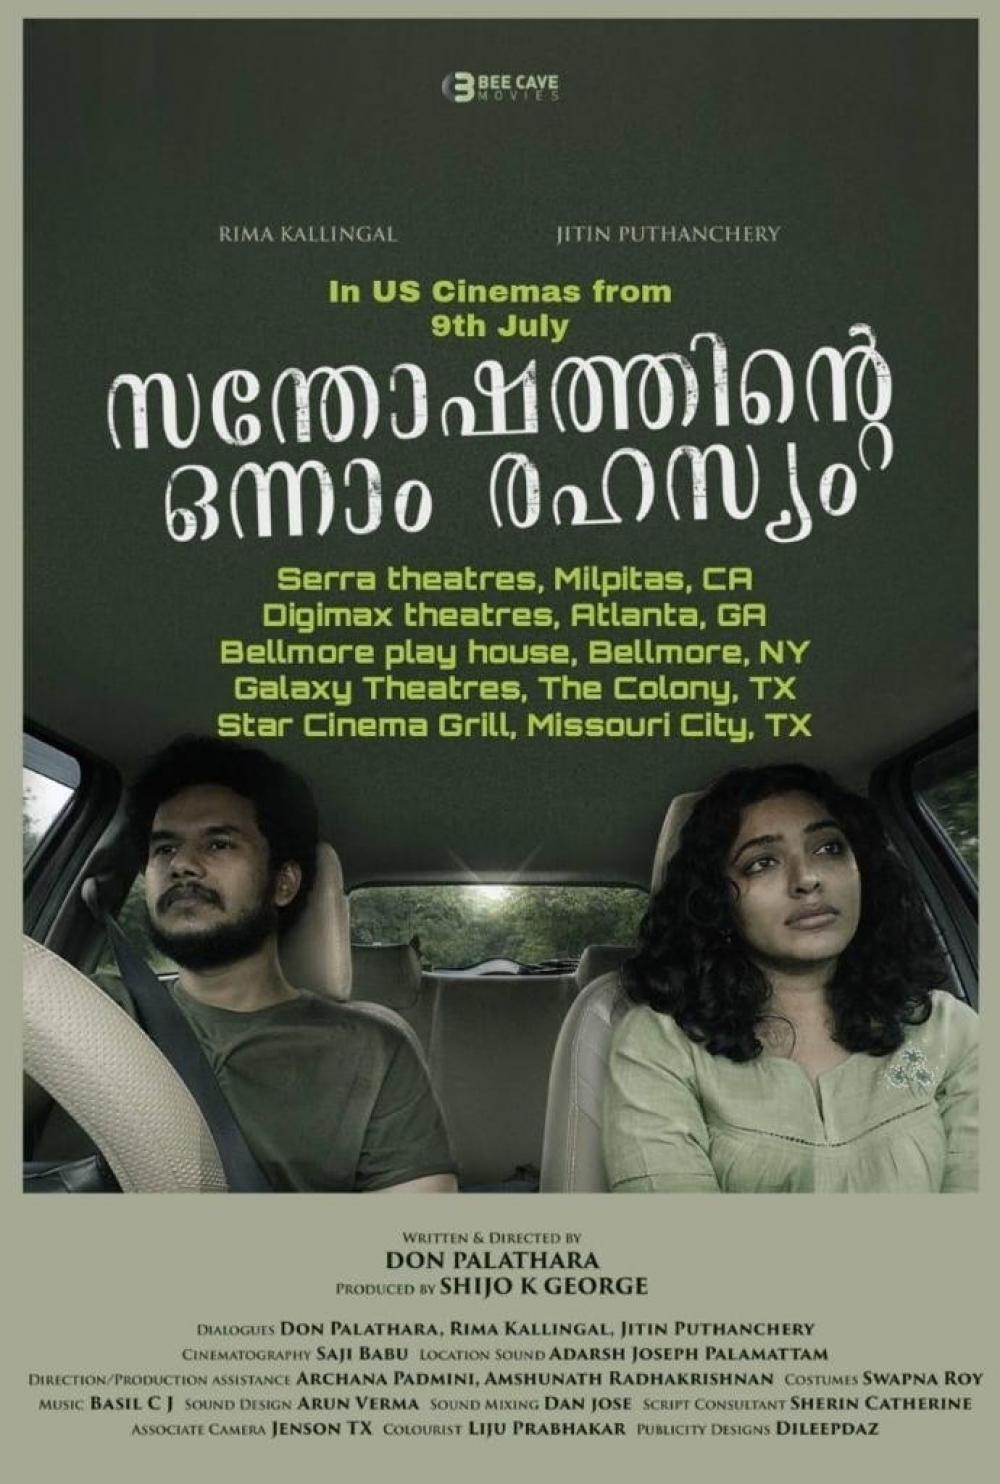 The Weekend Leader - After impressing at Moscow Festival, Malayalam film set for US release